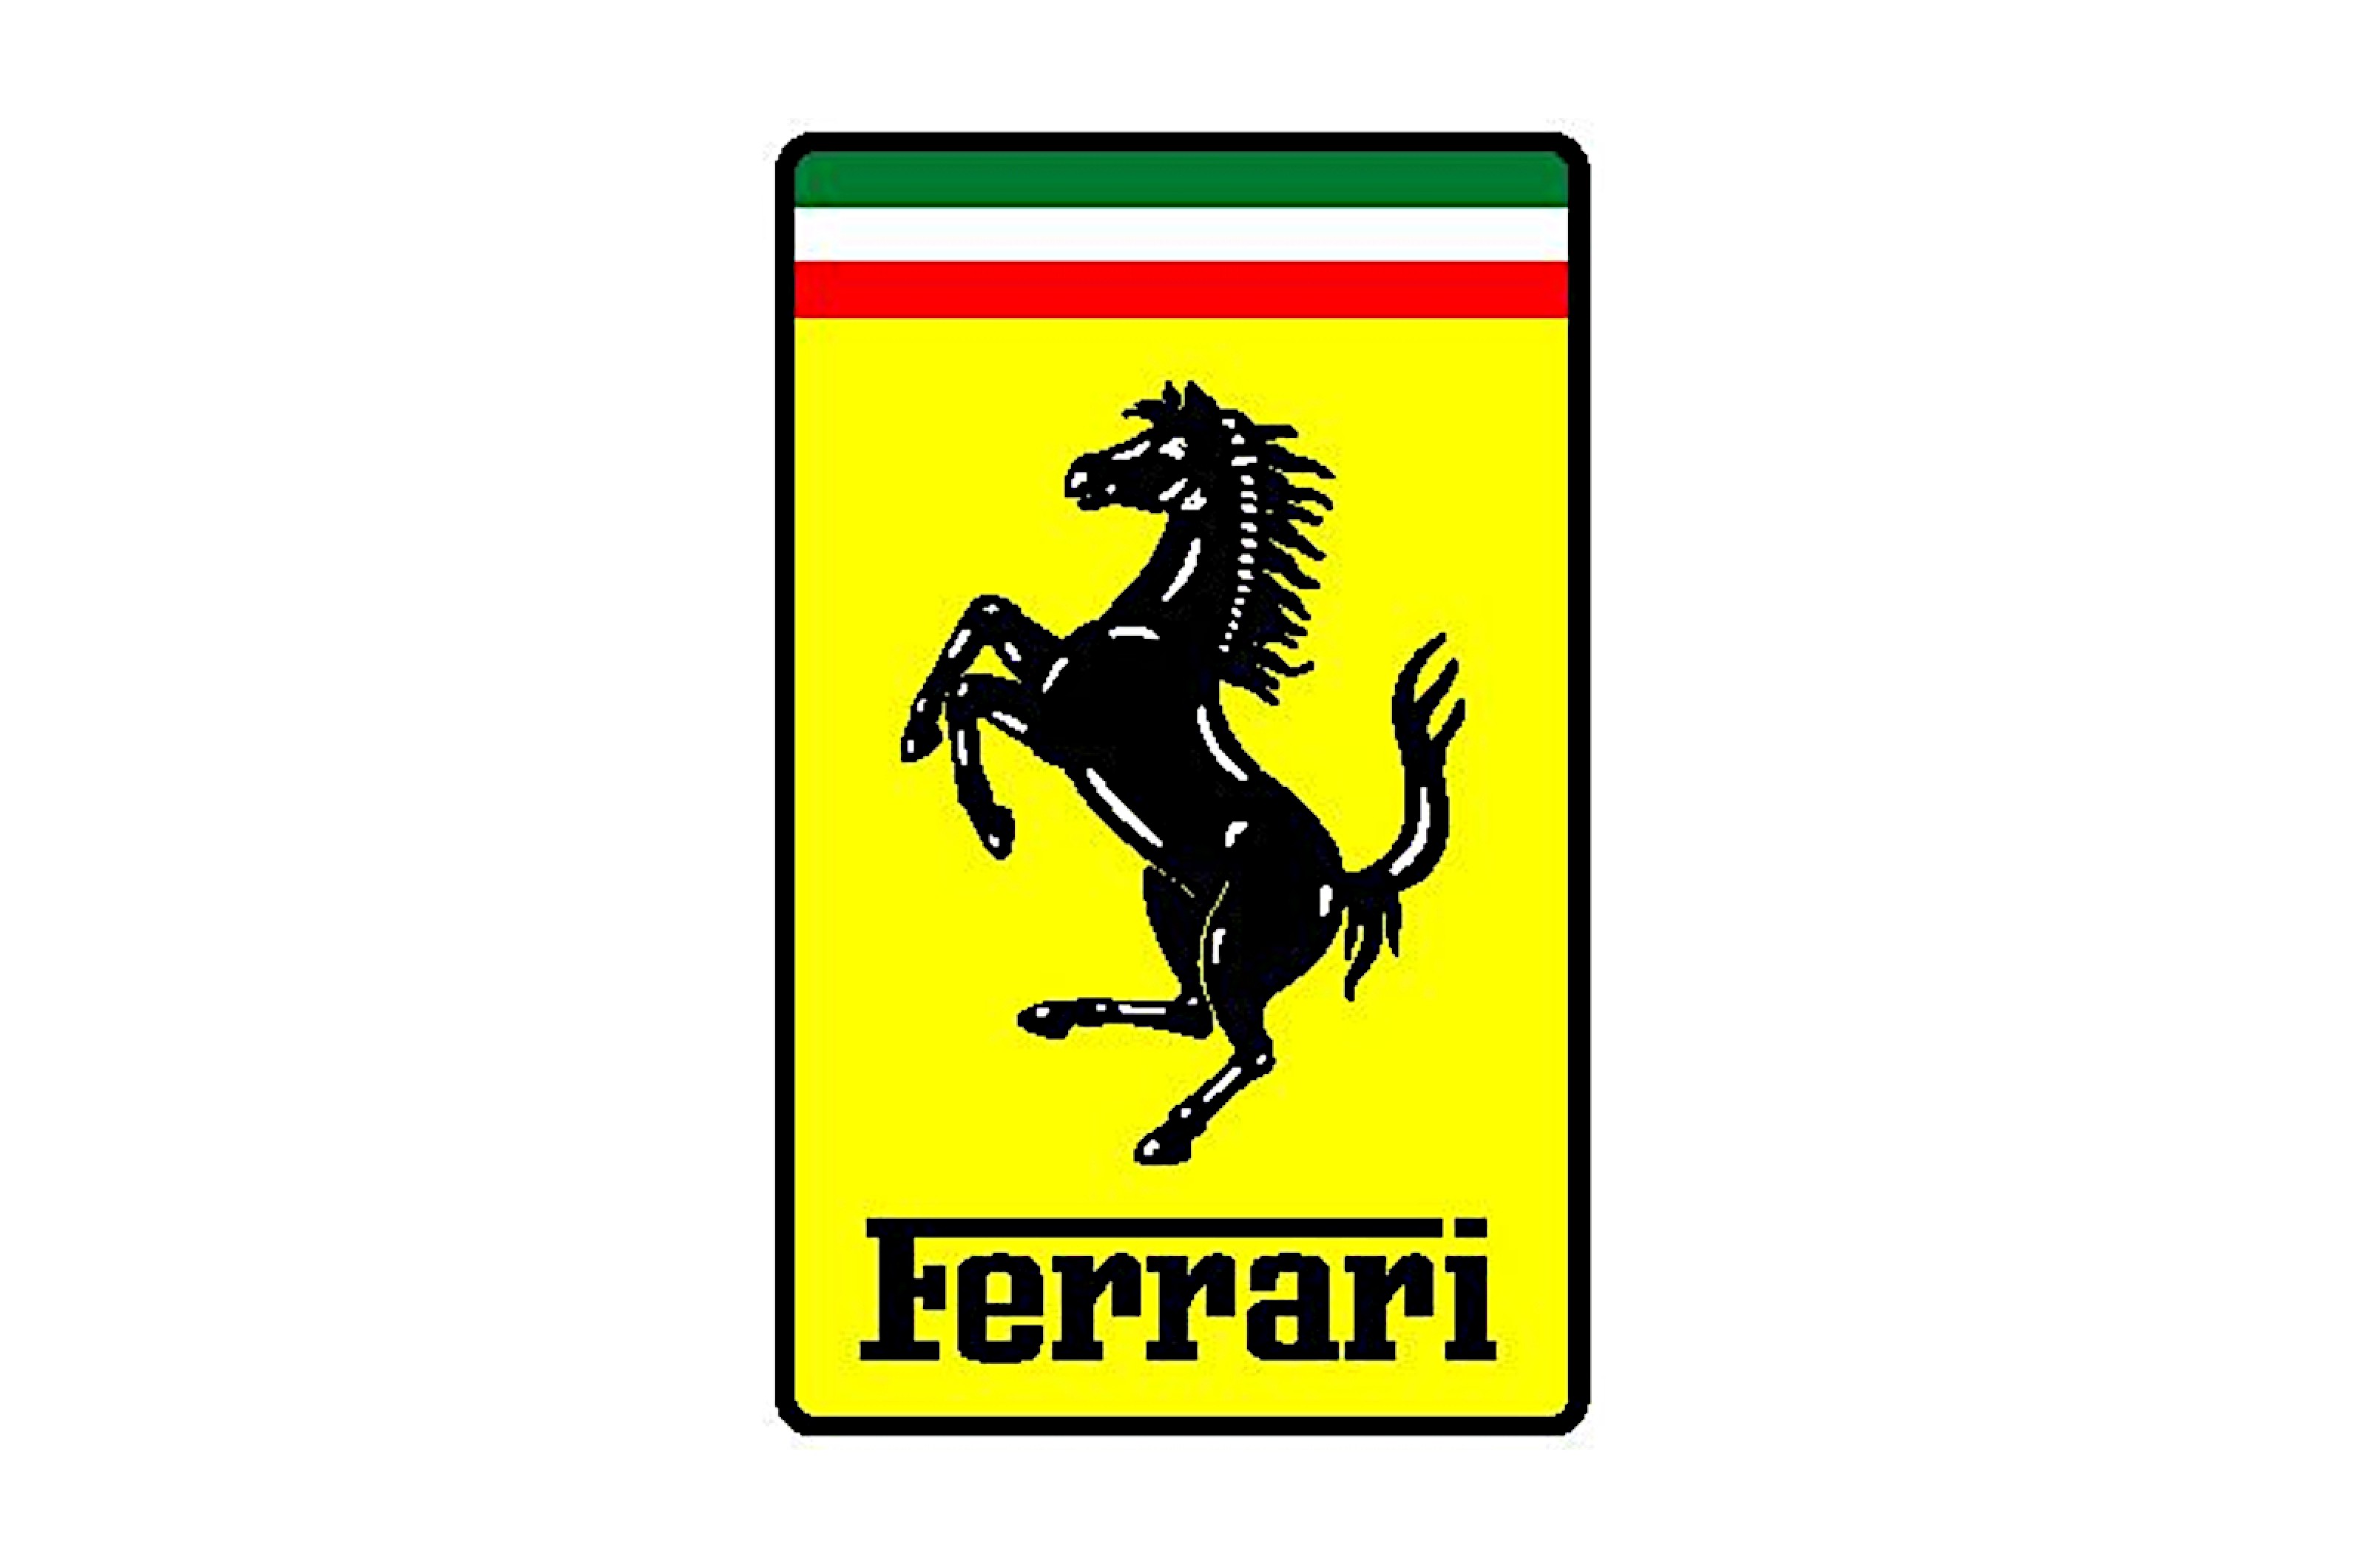 <p>The cavallino rampante, or prancing horse, has been part of the Ferrari logo since Ferrari was a race team rather than a car manufacturer.</p>  <p>It stands in an upright oblong (or sometimes a shield) under the colors of the Italian flag, and on a yellow background which may stand for Enzo Ferrari’s home town of Modena, whose own flag is partly that color and partly blue.</p>  <p>The horse is similar to the emblem used by the fighter pilot Count Francesco Baracca, and was suggested to Ferrari when Baracca’s parents presented him with a trophy after he had won a race in an Alfa Romeo in 1923.</p>  <p>The Baracca family’s coat of arms has a similar horse, which is probably where the Ferrari one came from, but another can be found on the flag of Stuttgart. According to one story, whose plausibility you can judge for yourself, Baracca adopted it because the first plane he shot down in WW1 was piloted by an unfortunate fellow from Stuttgart.</p>